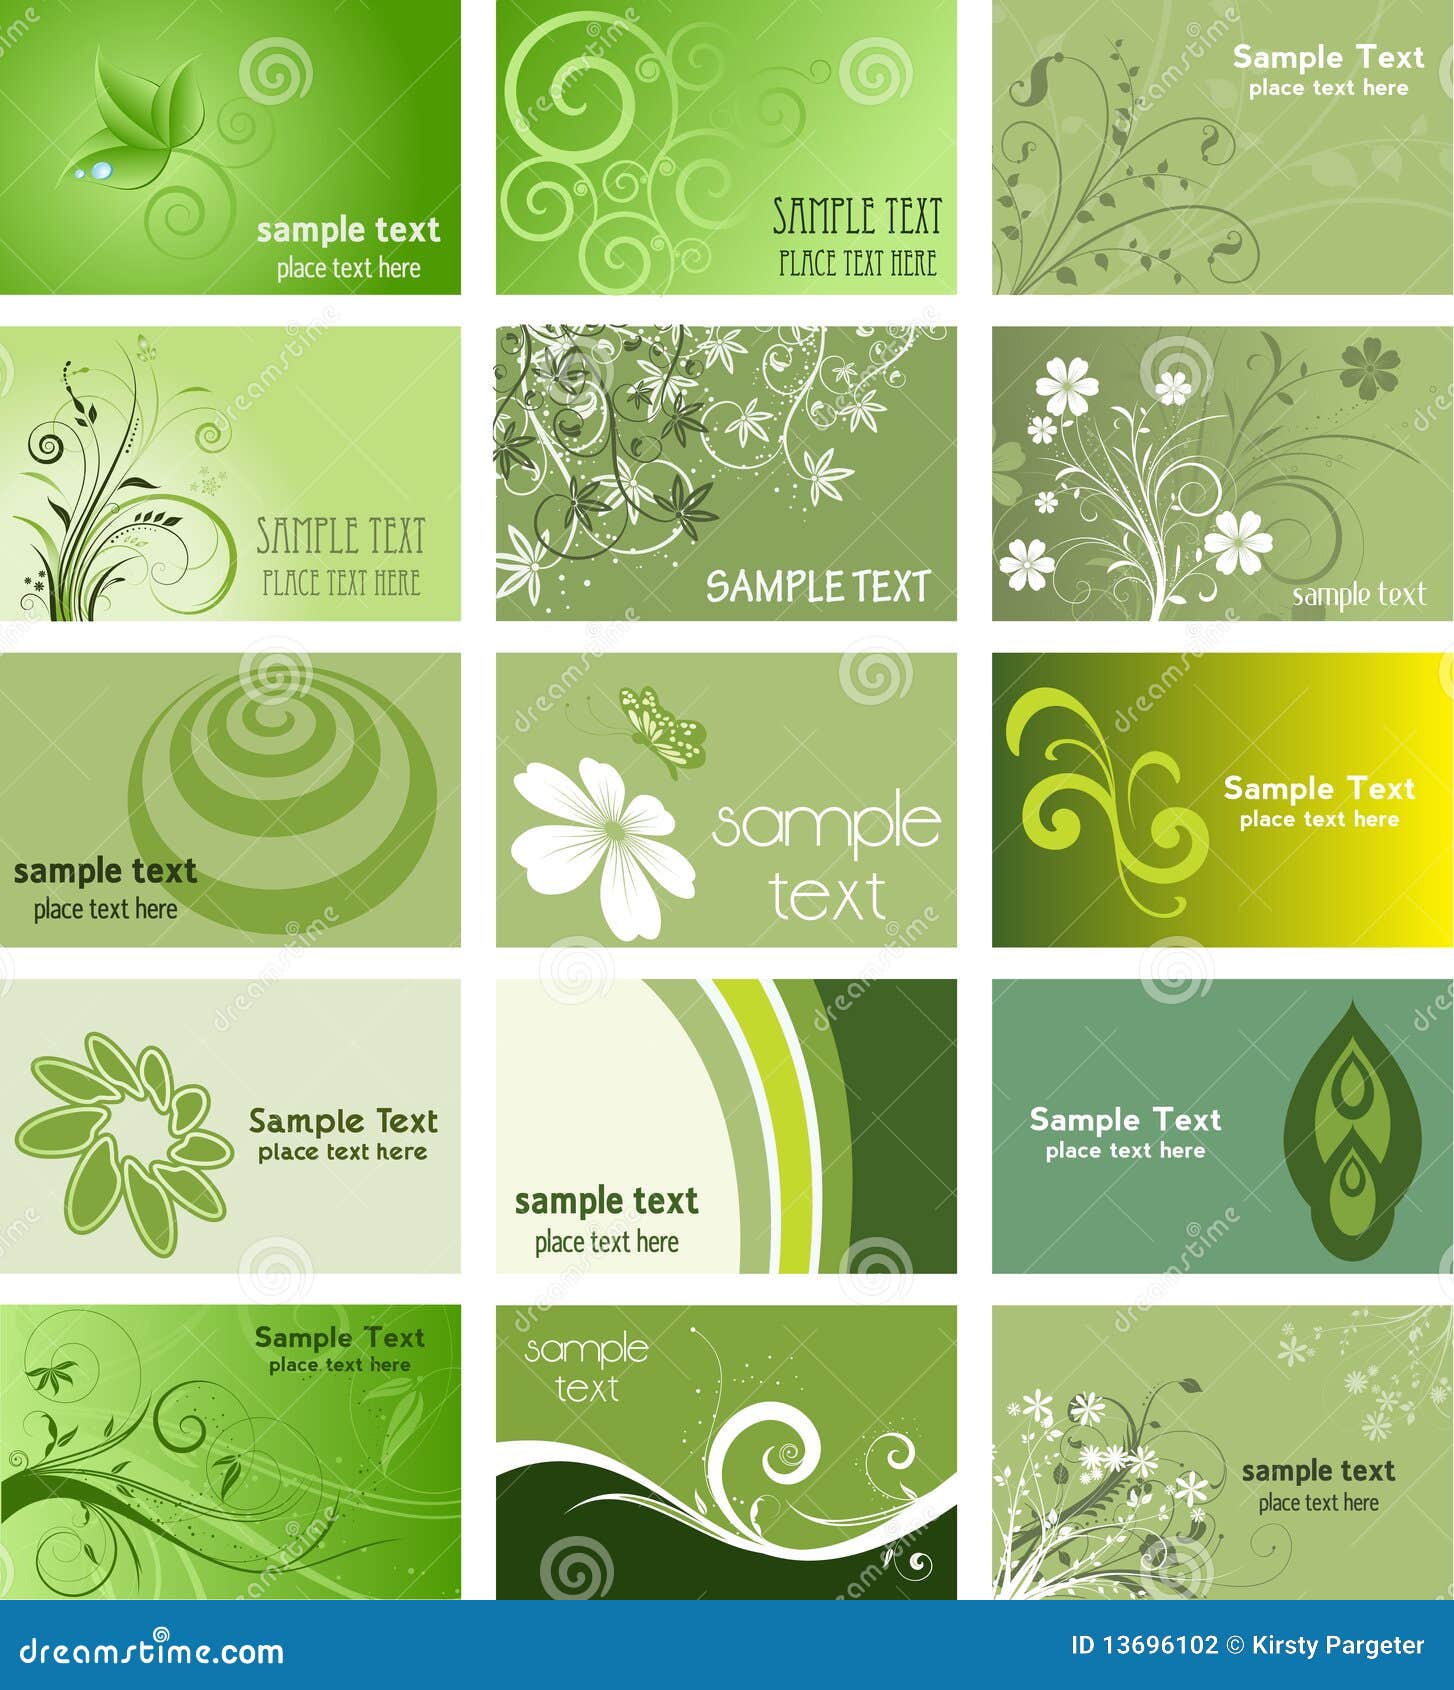 nature business cards 2